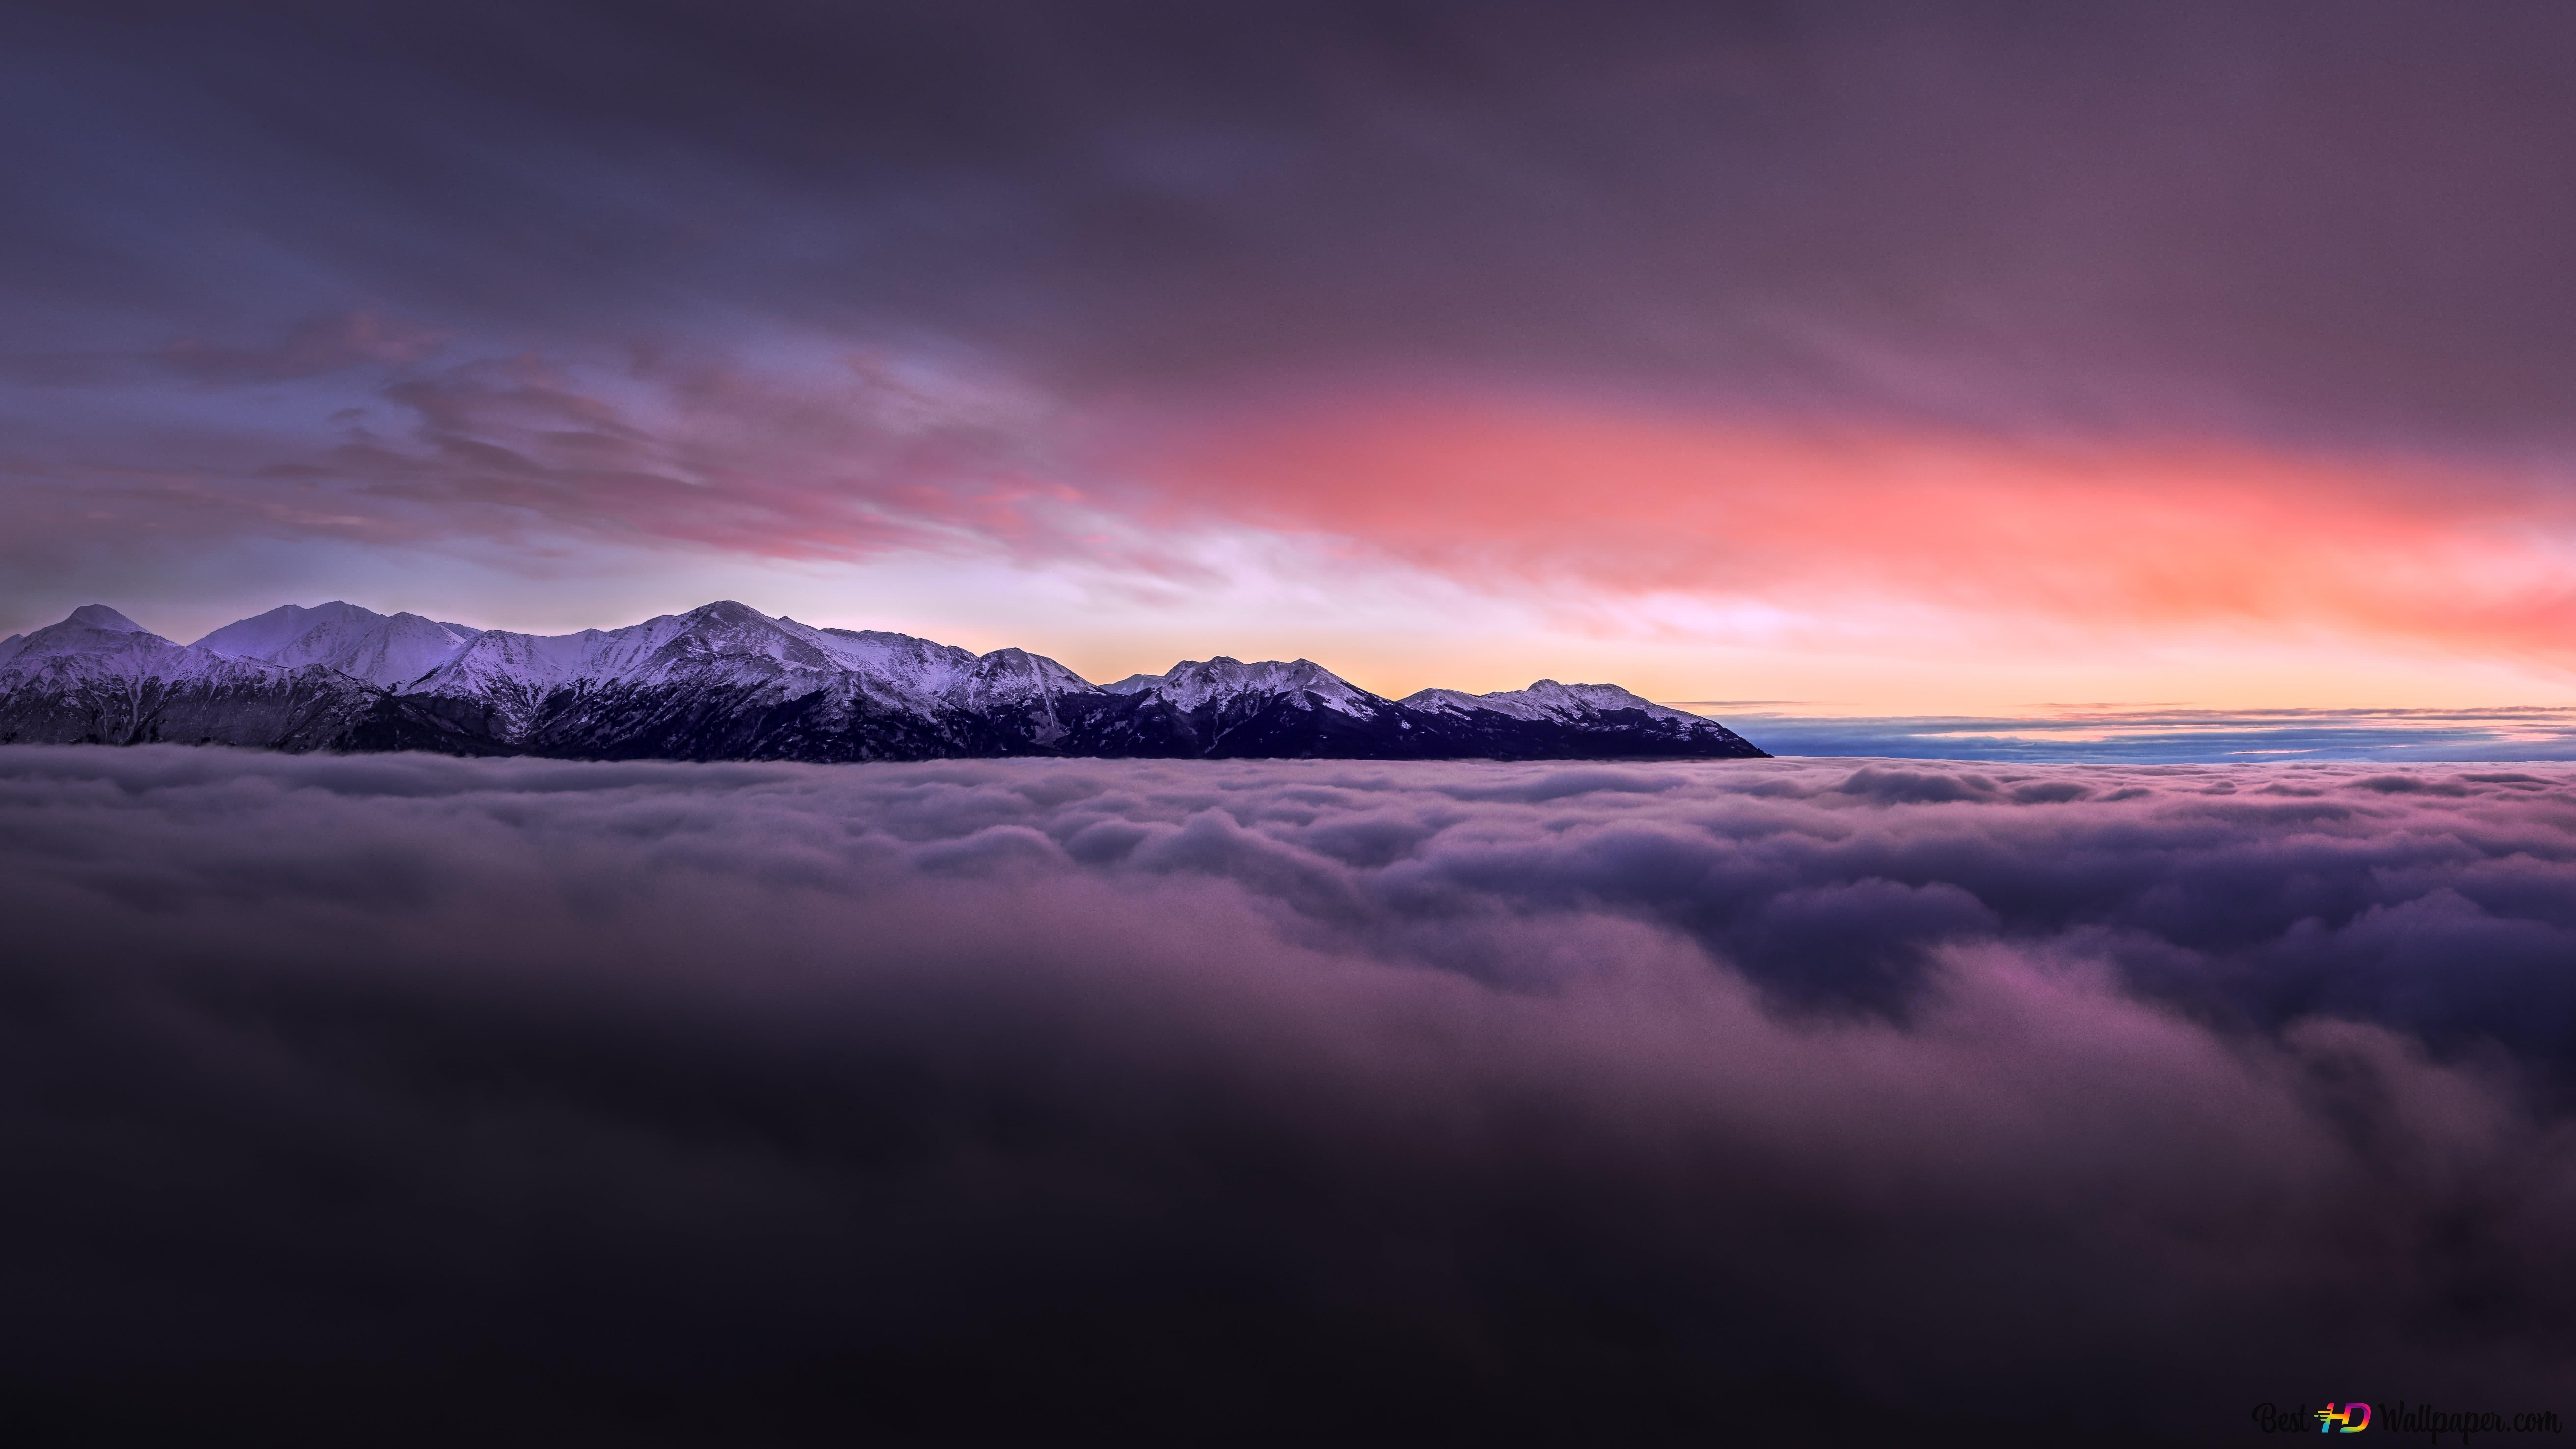 Snowy mountain peaks amid mist stretching to crimson clouds 8K wallpaper download